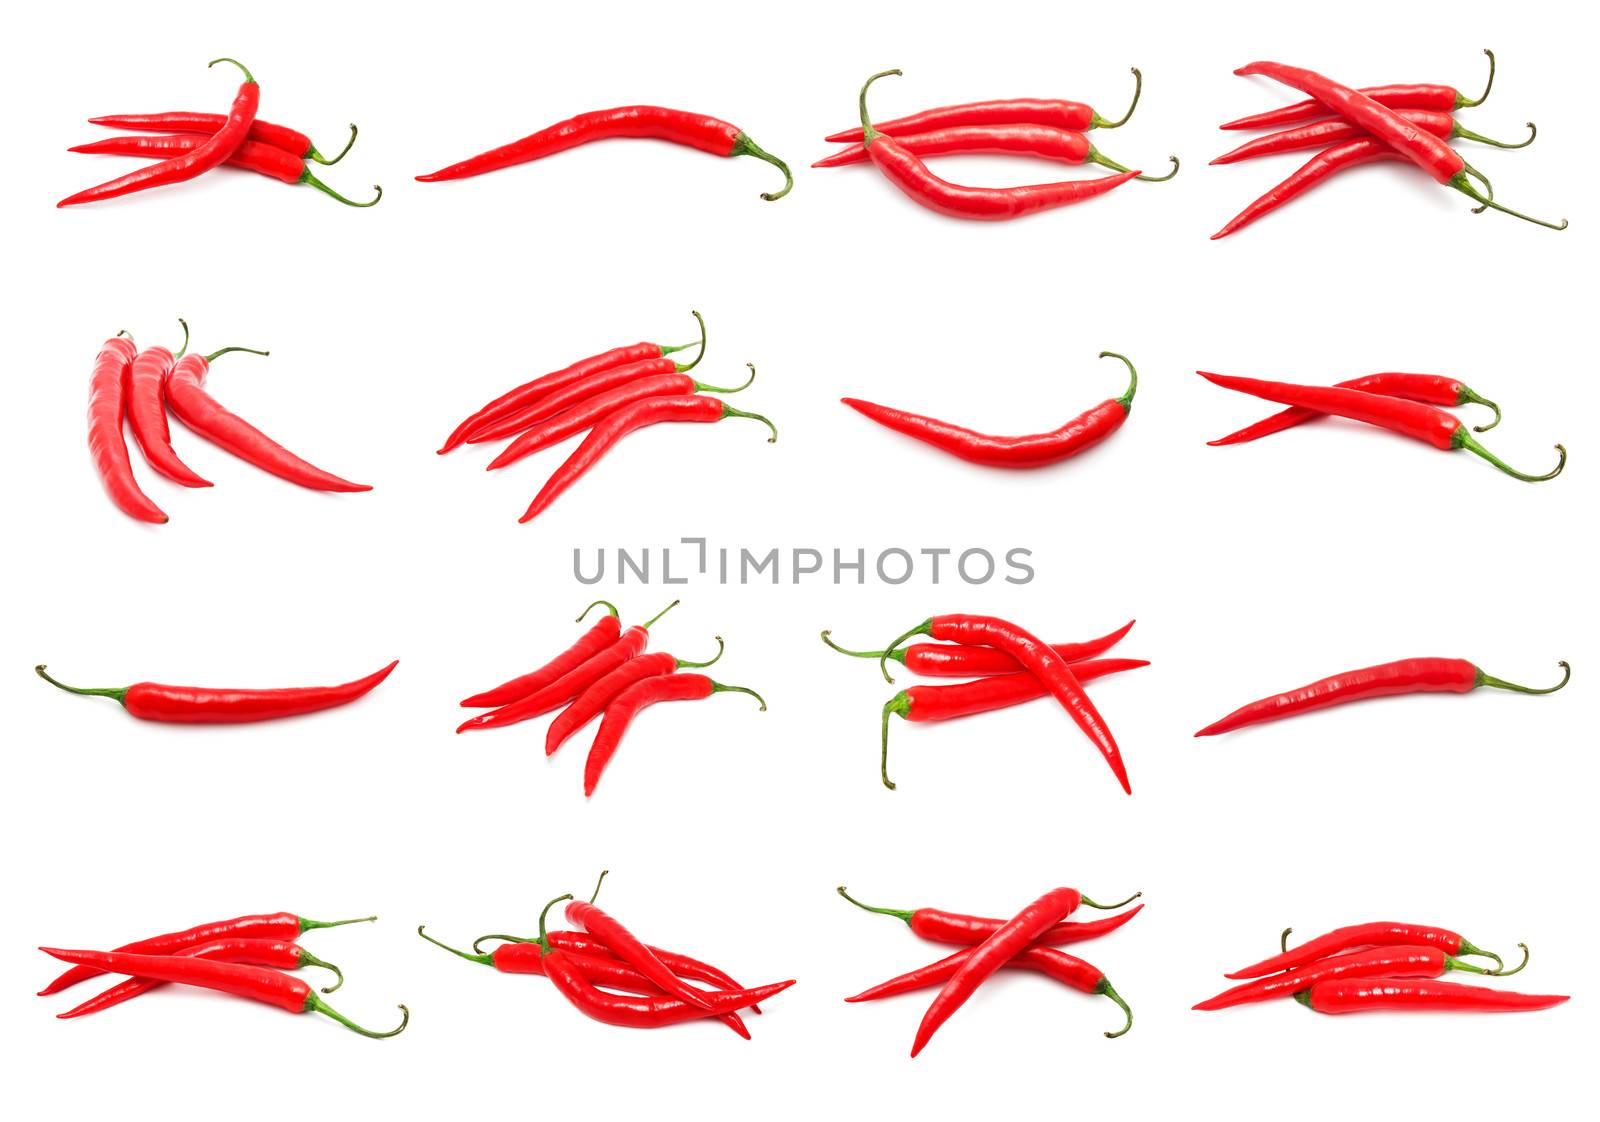 Chili peppers by sailorr